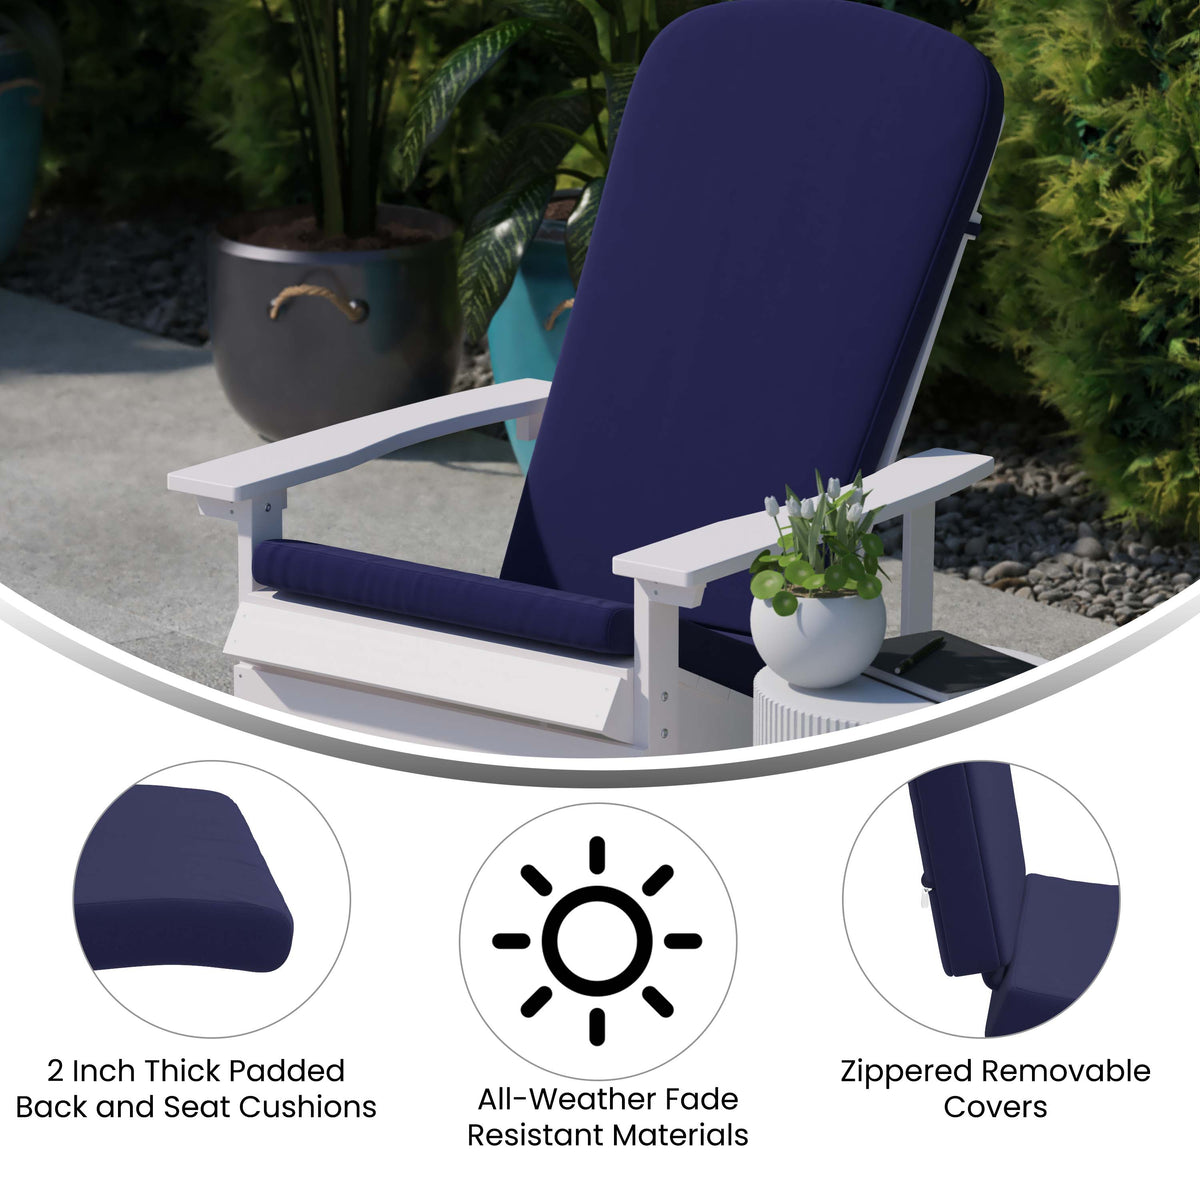 White/Blue |#| Indoor/Outdoor White Rocking Adirondack Chairs with Blue Cushions - Set of 2